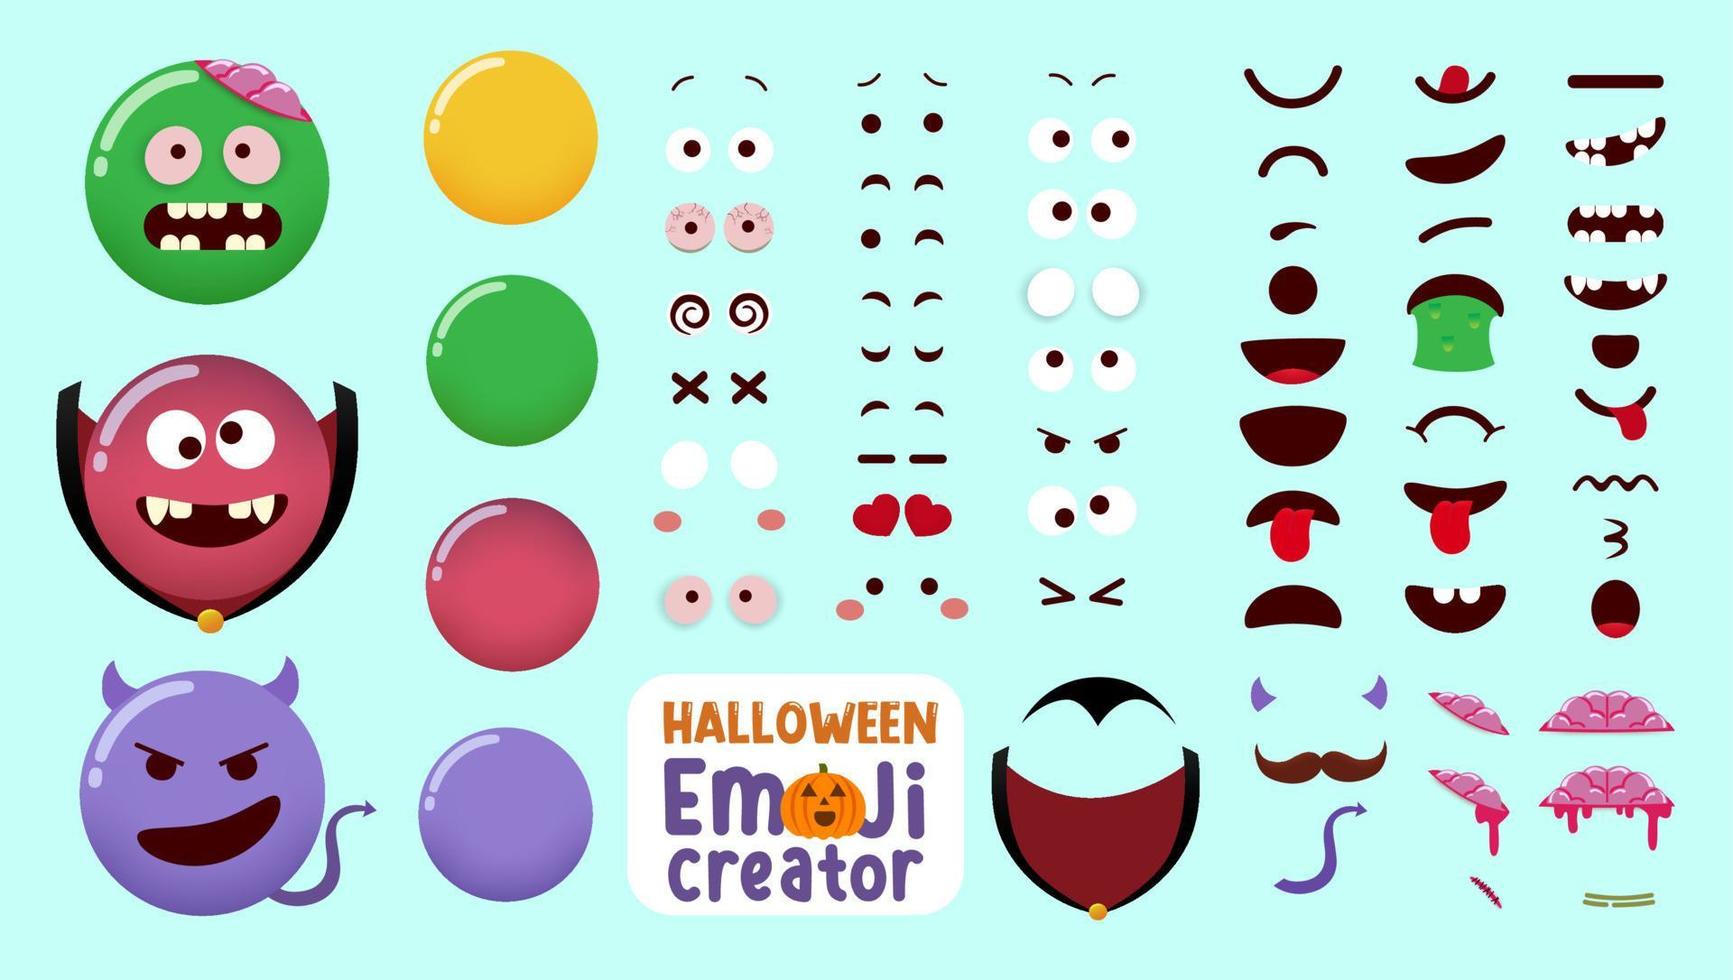 Halloween emoji vector creator kit. Emojis character set in zombie, vampire and devil monster costume with editable face parts for horror characters emoticon design. Vector illustration.